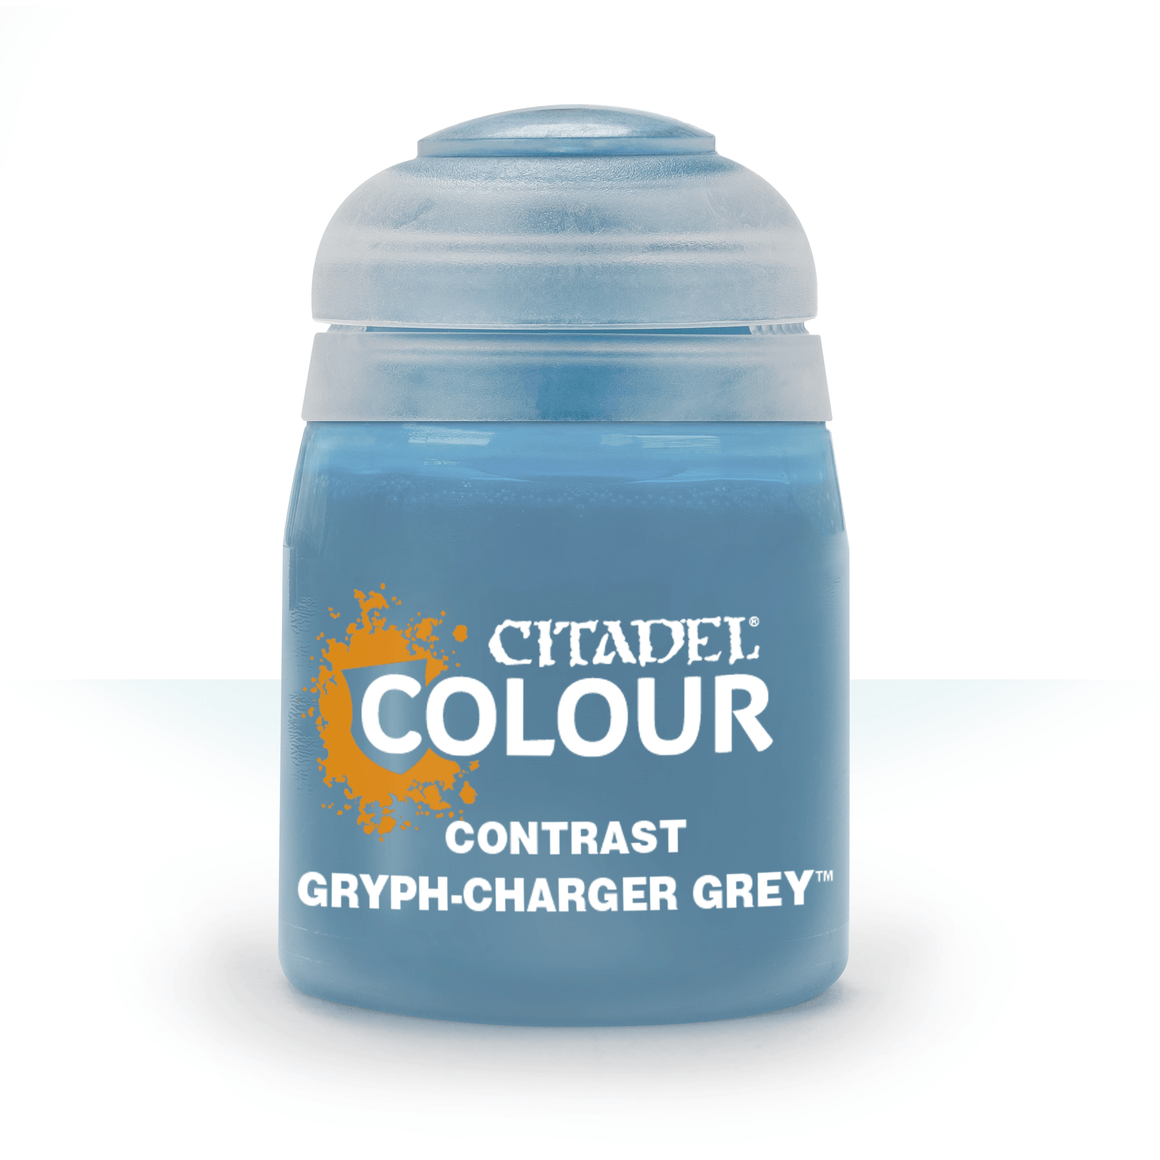 Citadel Contrast Paint Gryph-Charger Grey